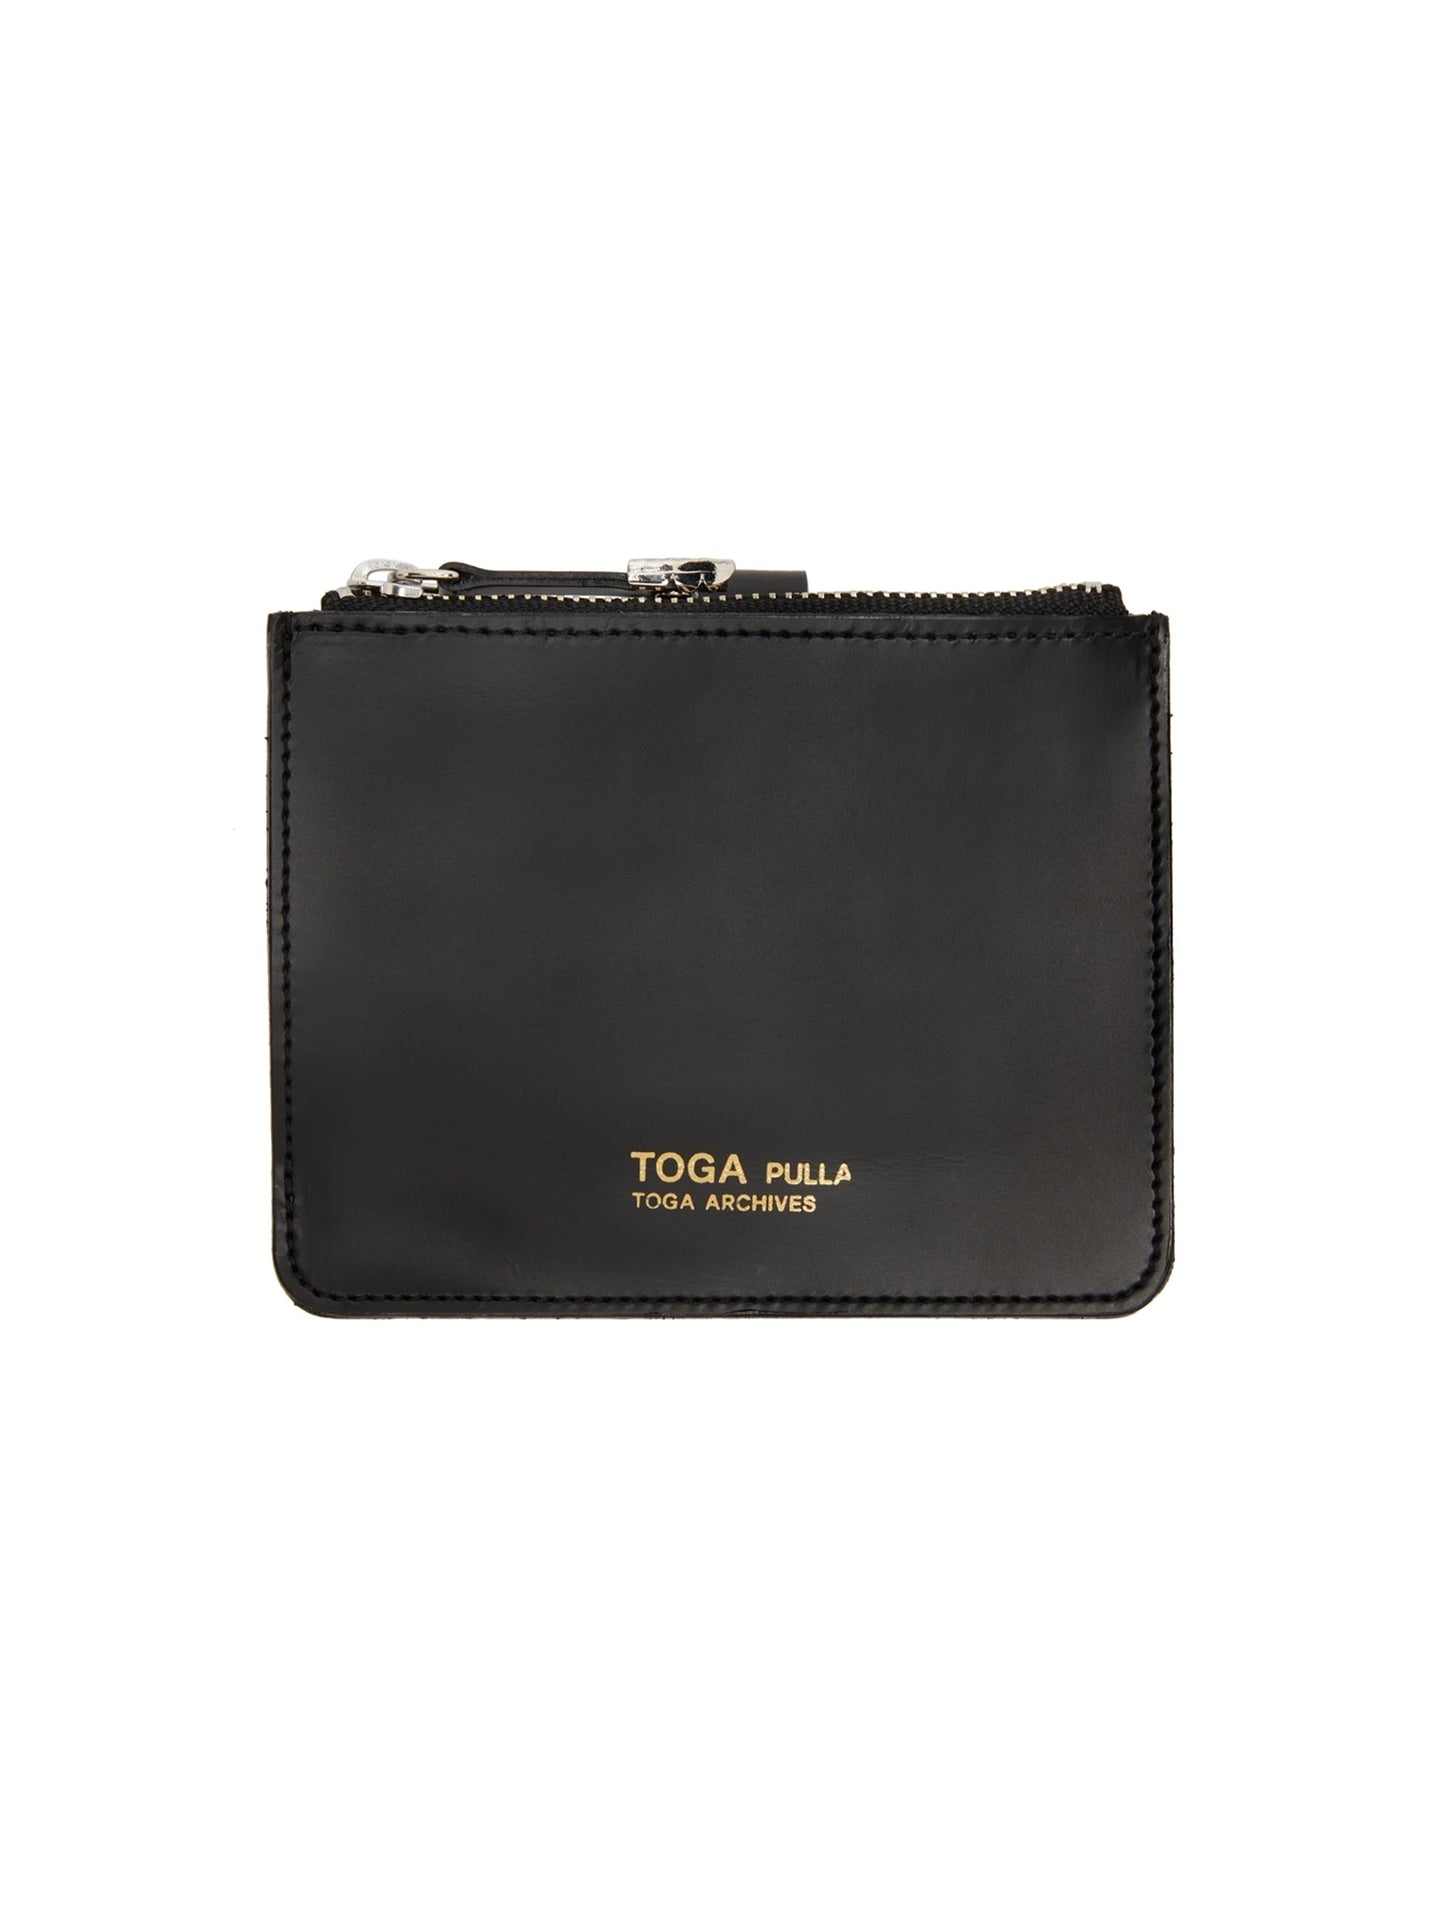 Toga Pulla Leather Wallet